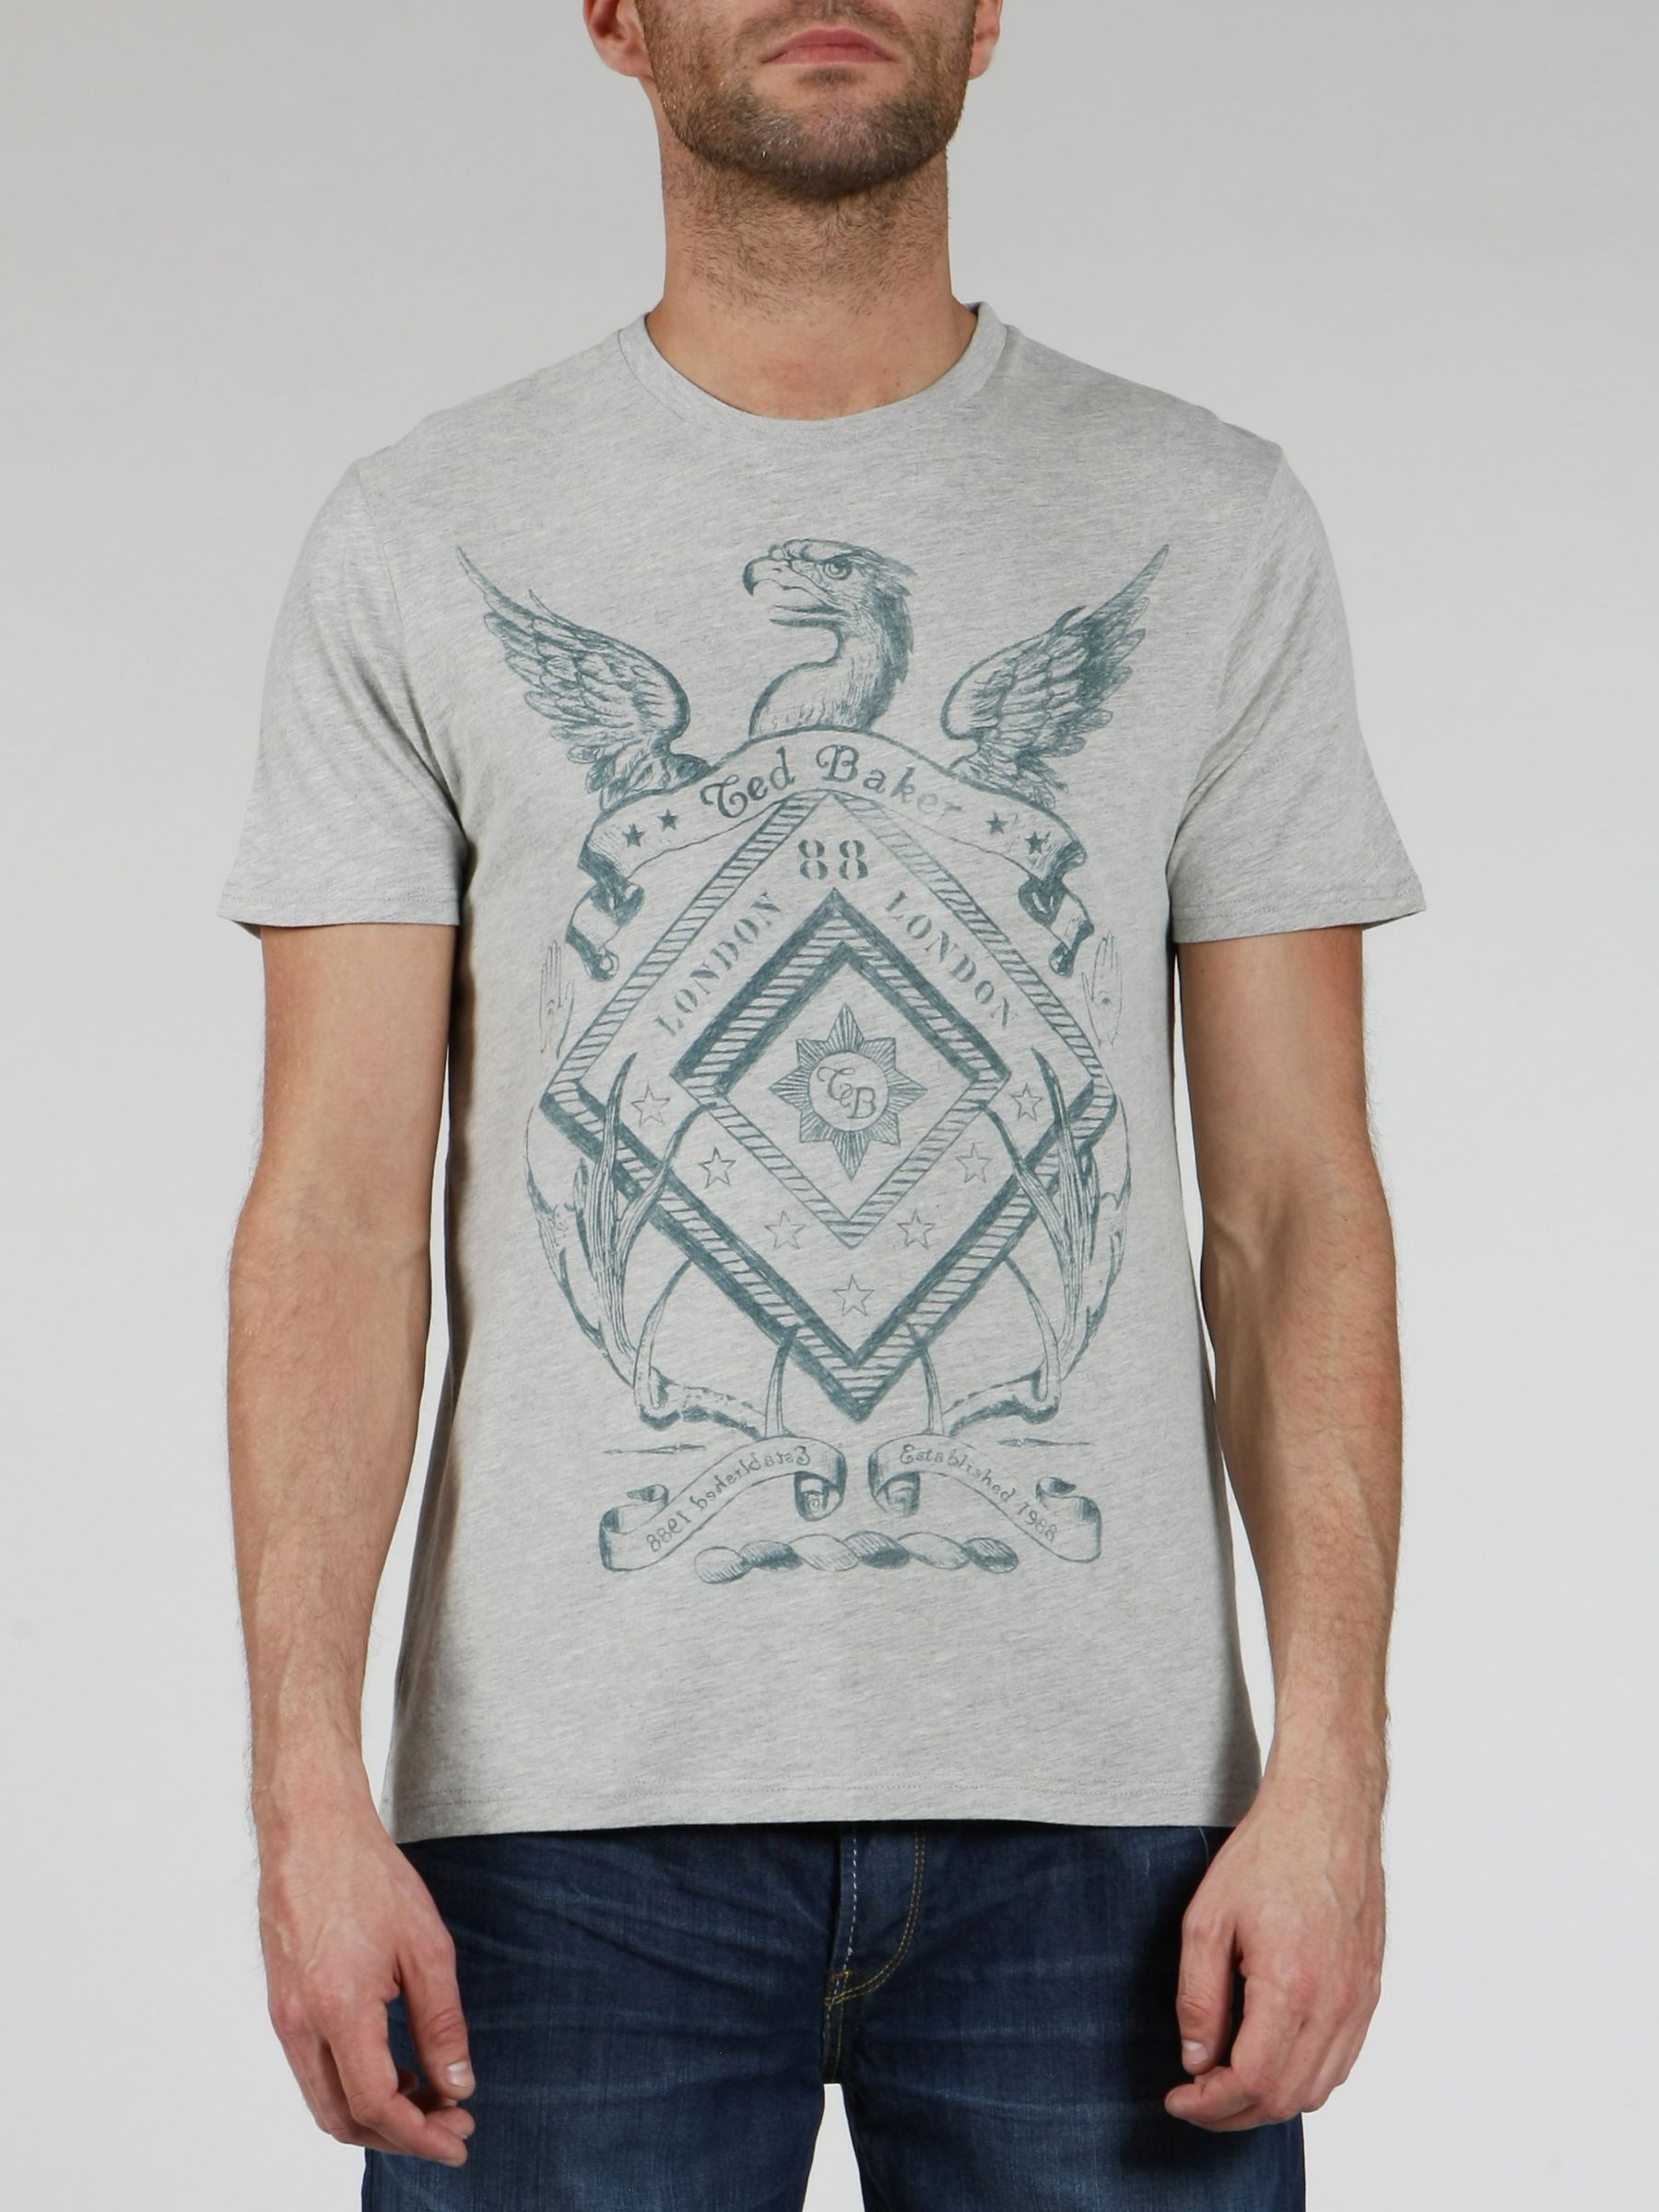 Short-Sleeve Sketched Graphic T-Shirt,